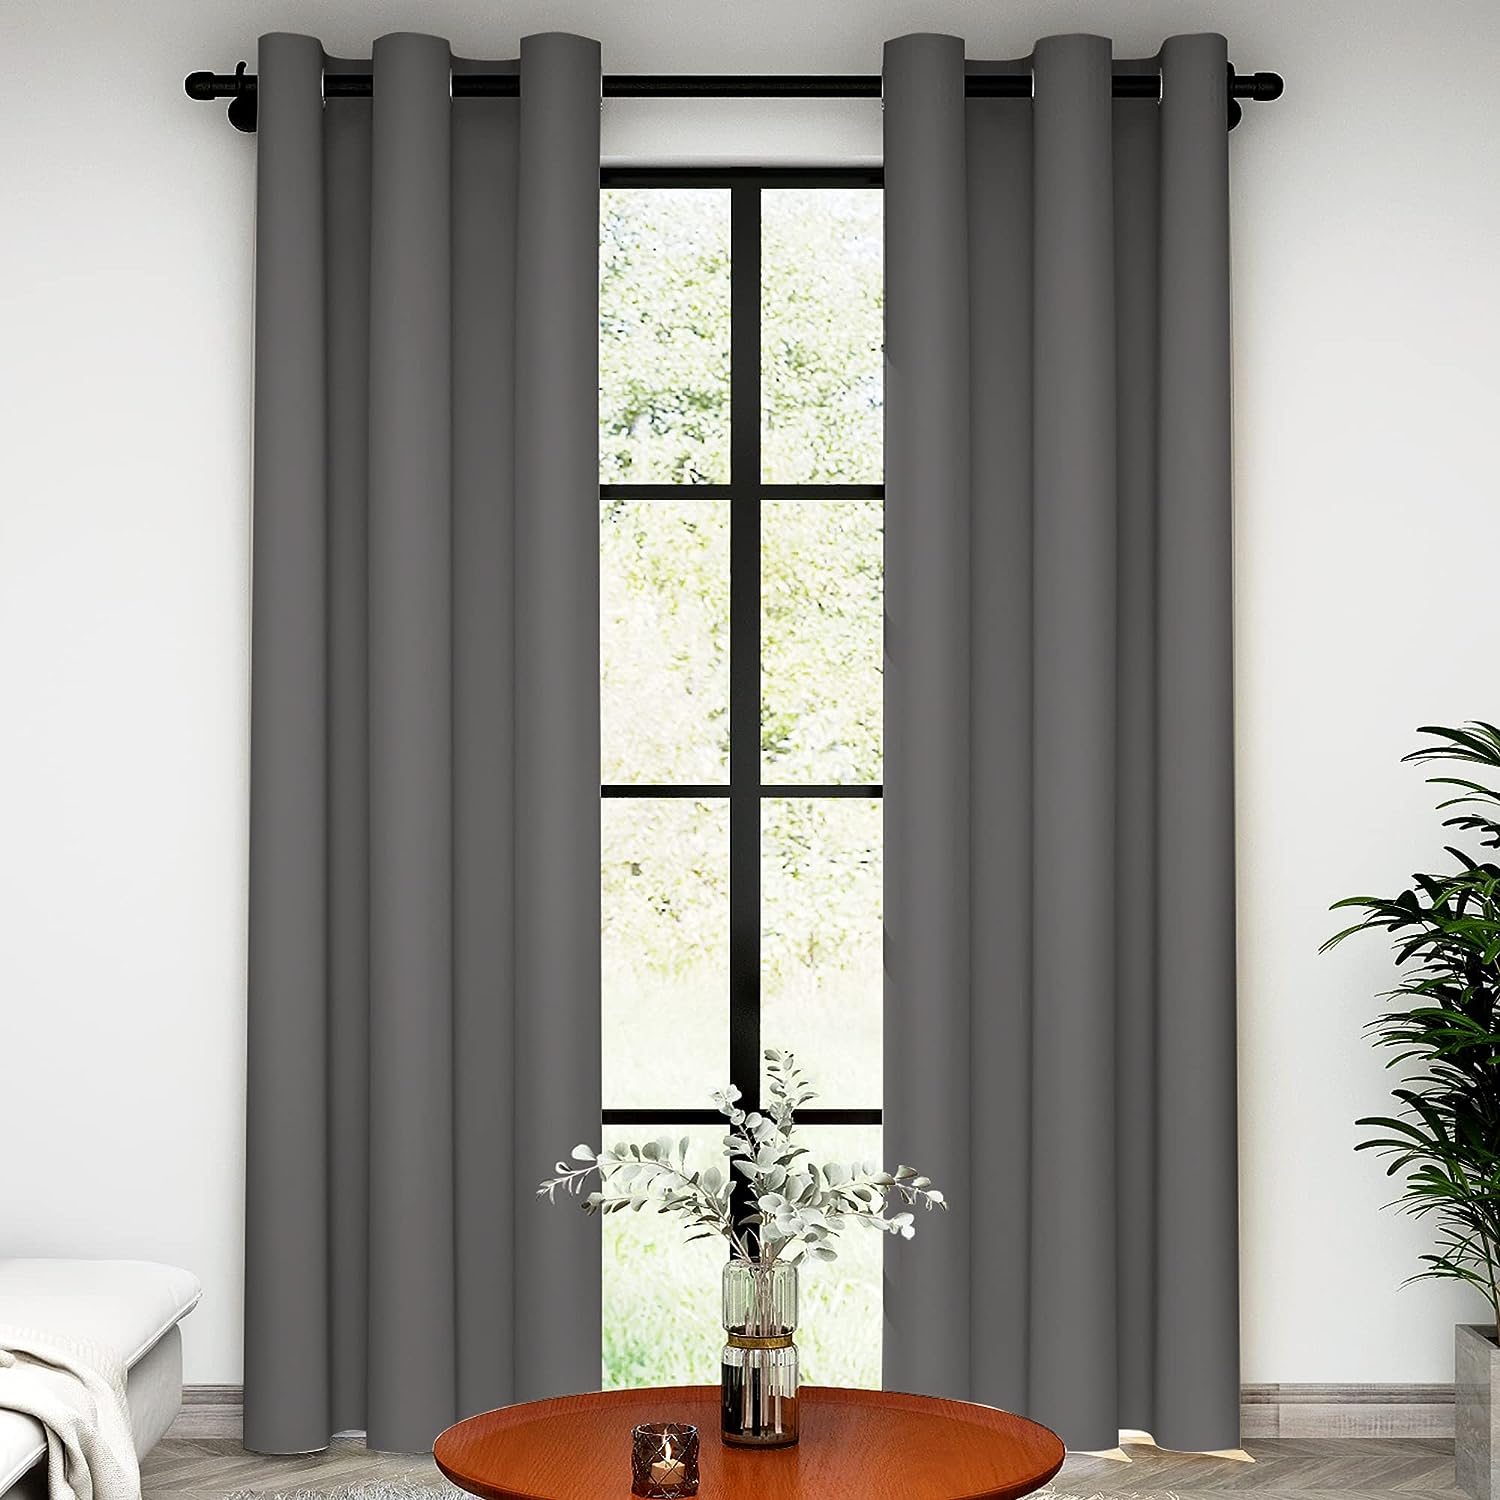 Deconovo Thermal Insulated Sound Proof Curtains for [...]